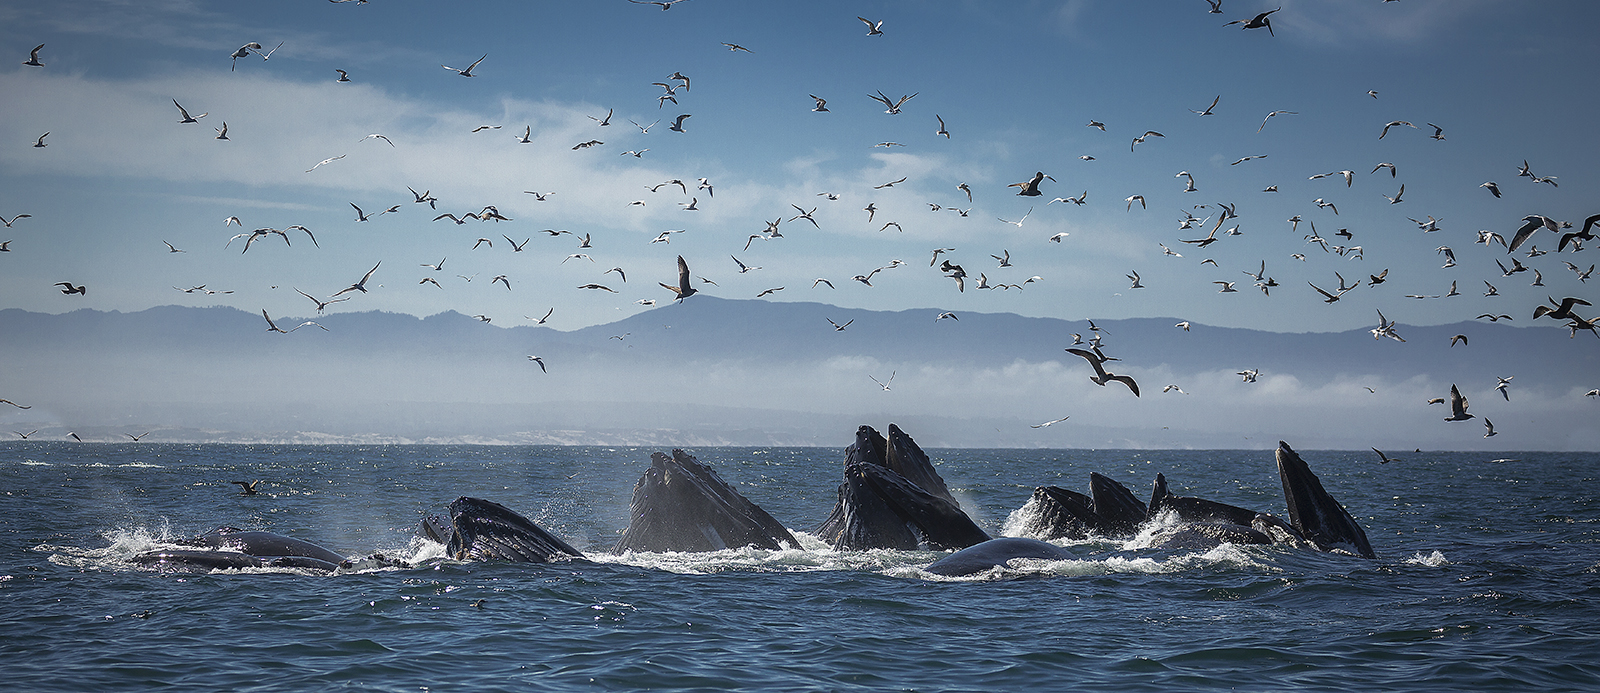 The Best Places for Whale Watching in Northern California | Select Registry